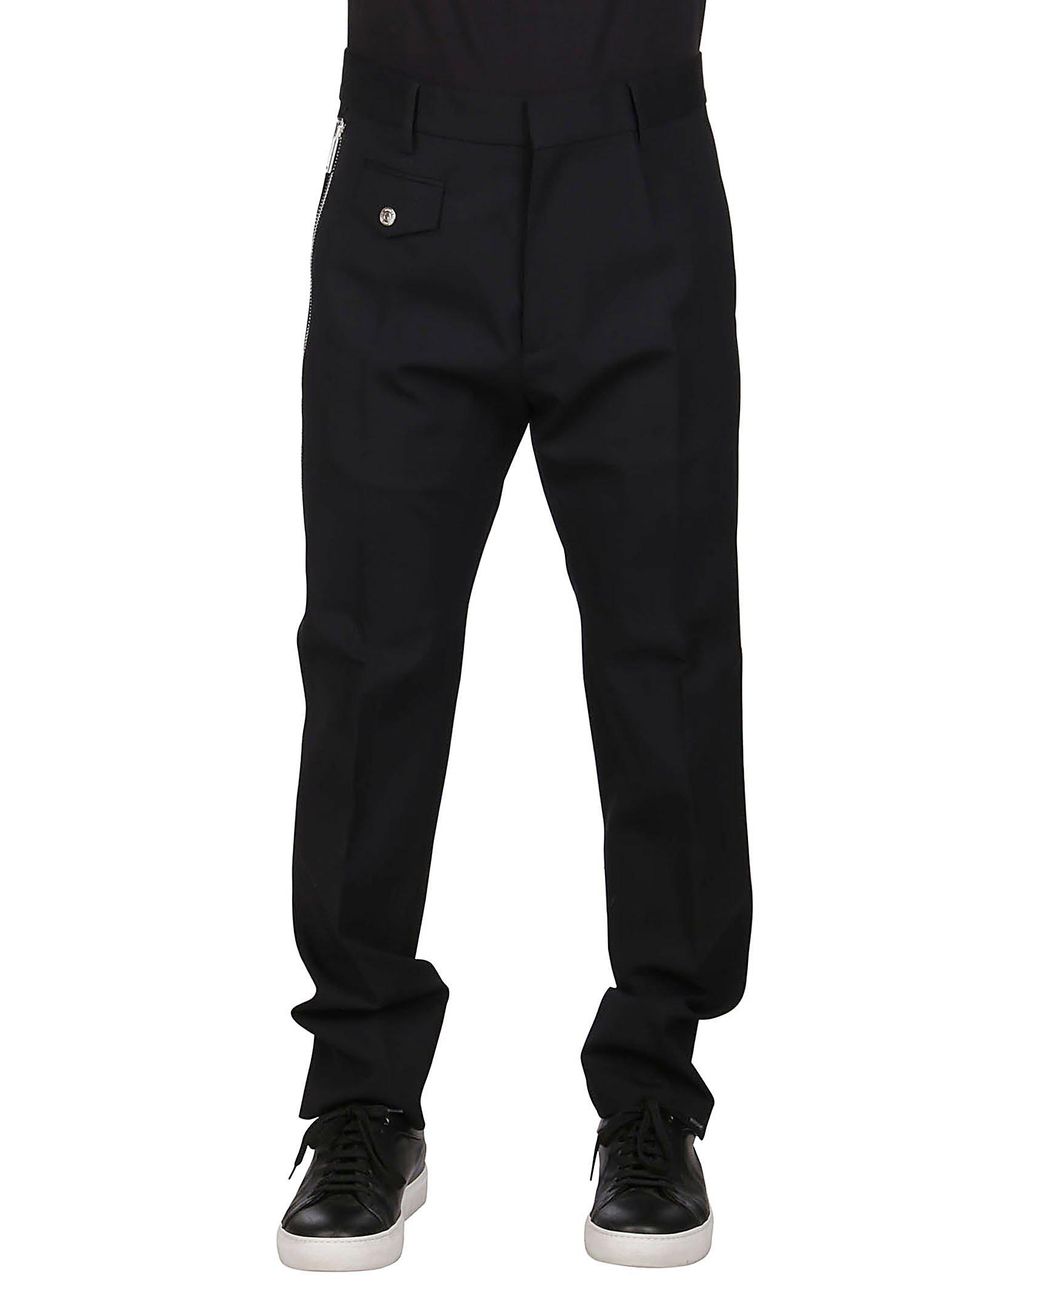 DSquared² Synthetic Straight Leg Pants in Black for Men - Lyst